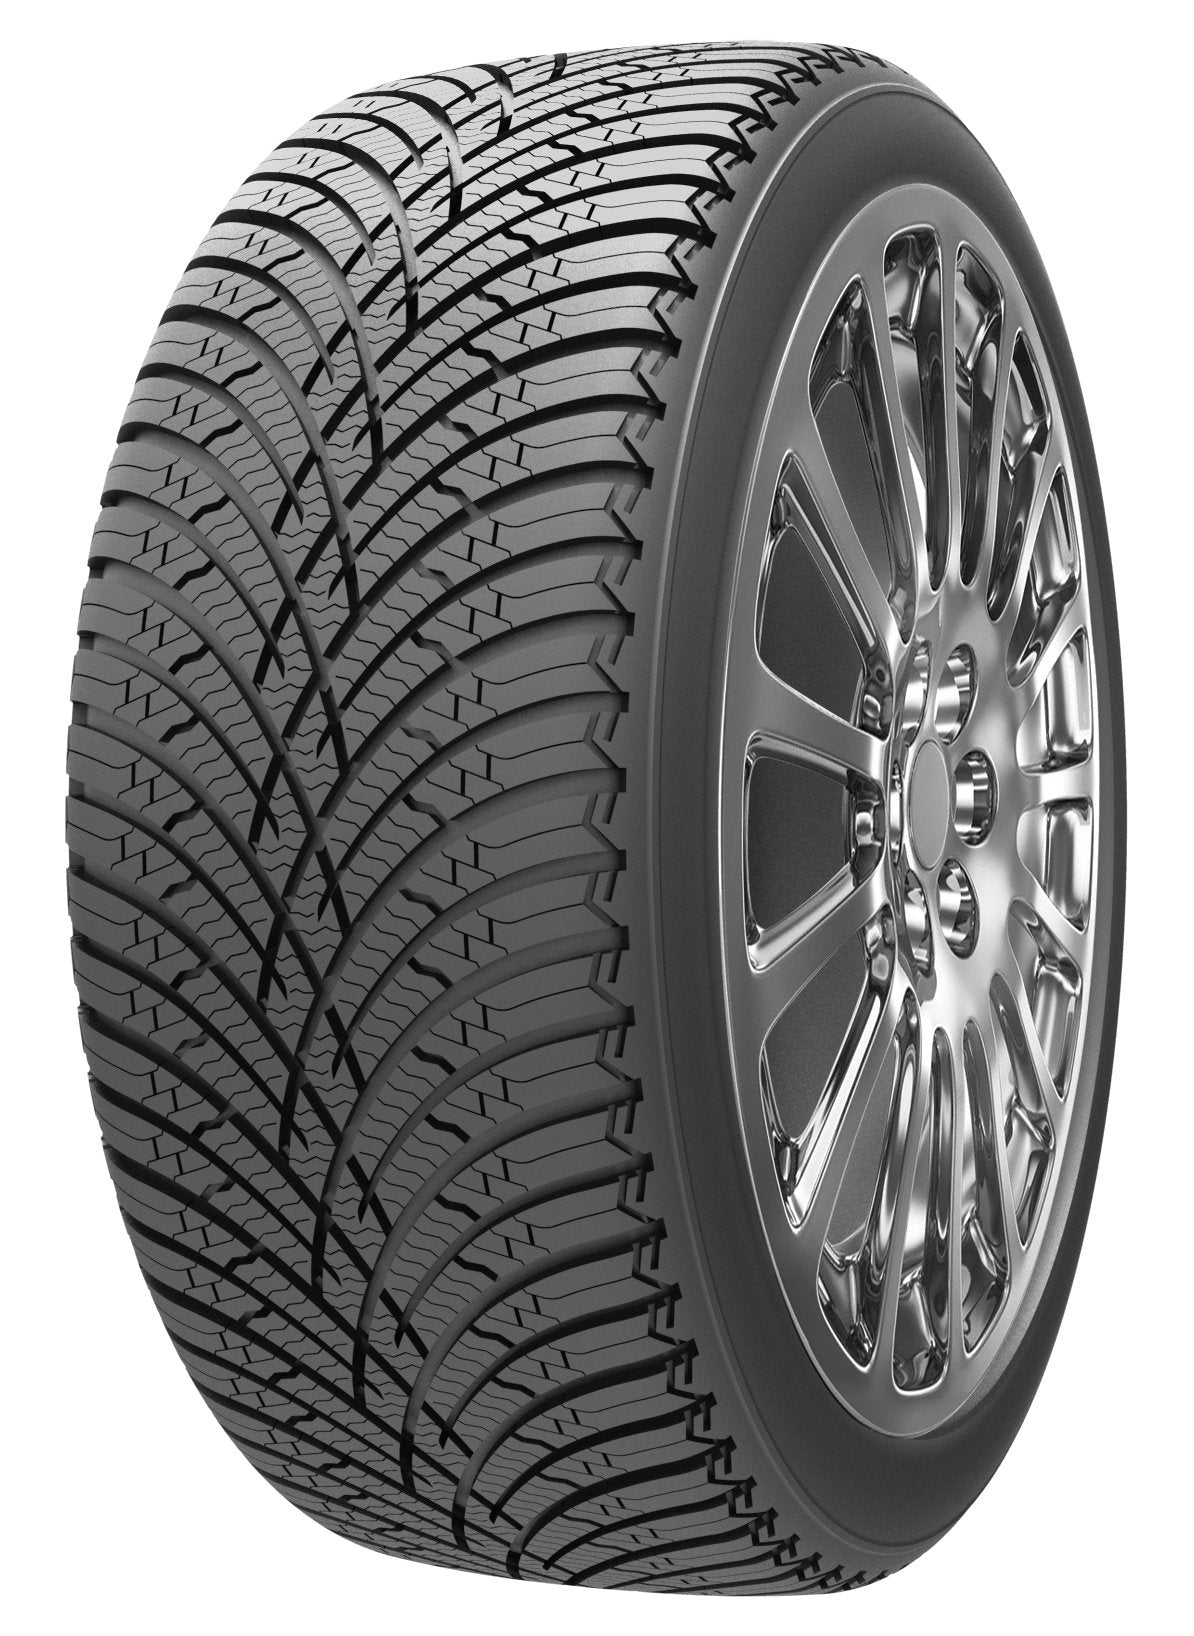 215/60R16 HEADWAY PMS01 ALL WEATHER - Toee Tire